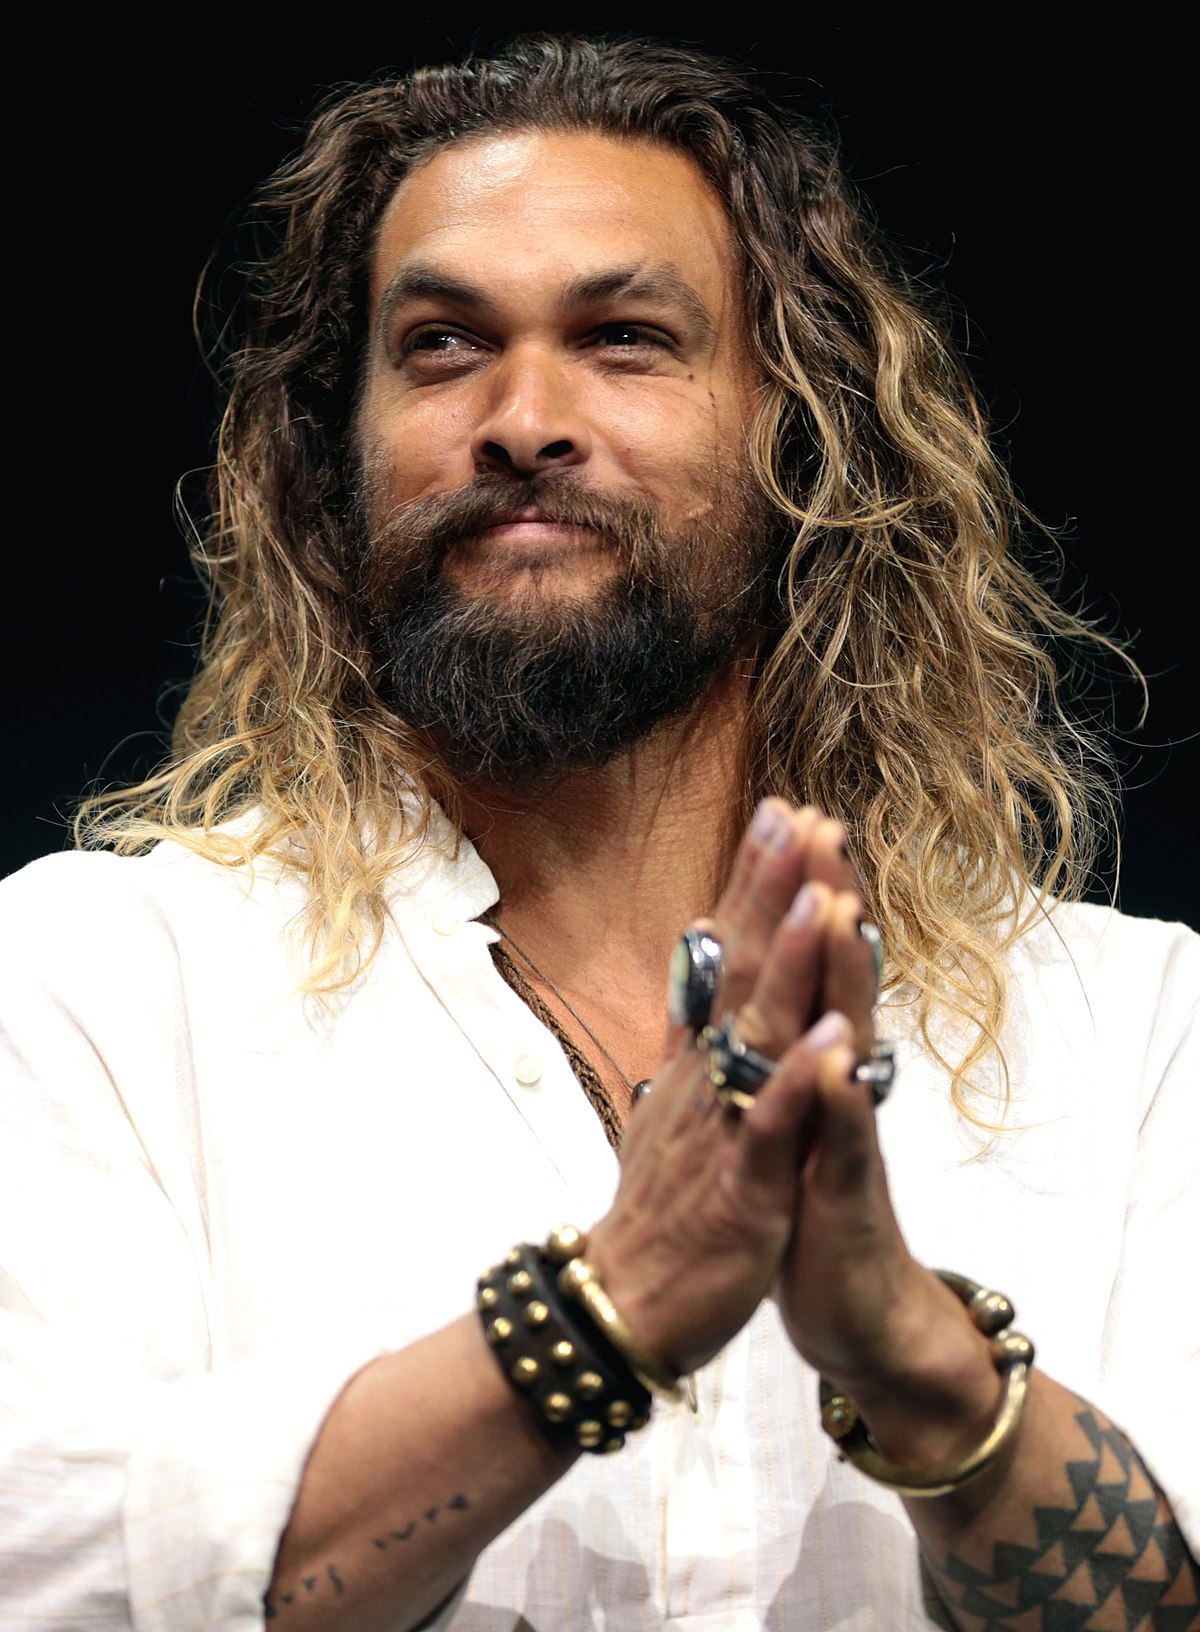 We've Dug Up Some Old Pictures of Jason Momoa and They Are Just as Amazing as You'd ...